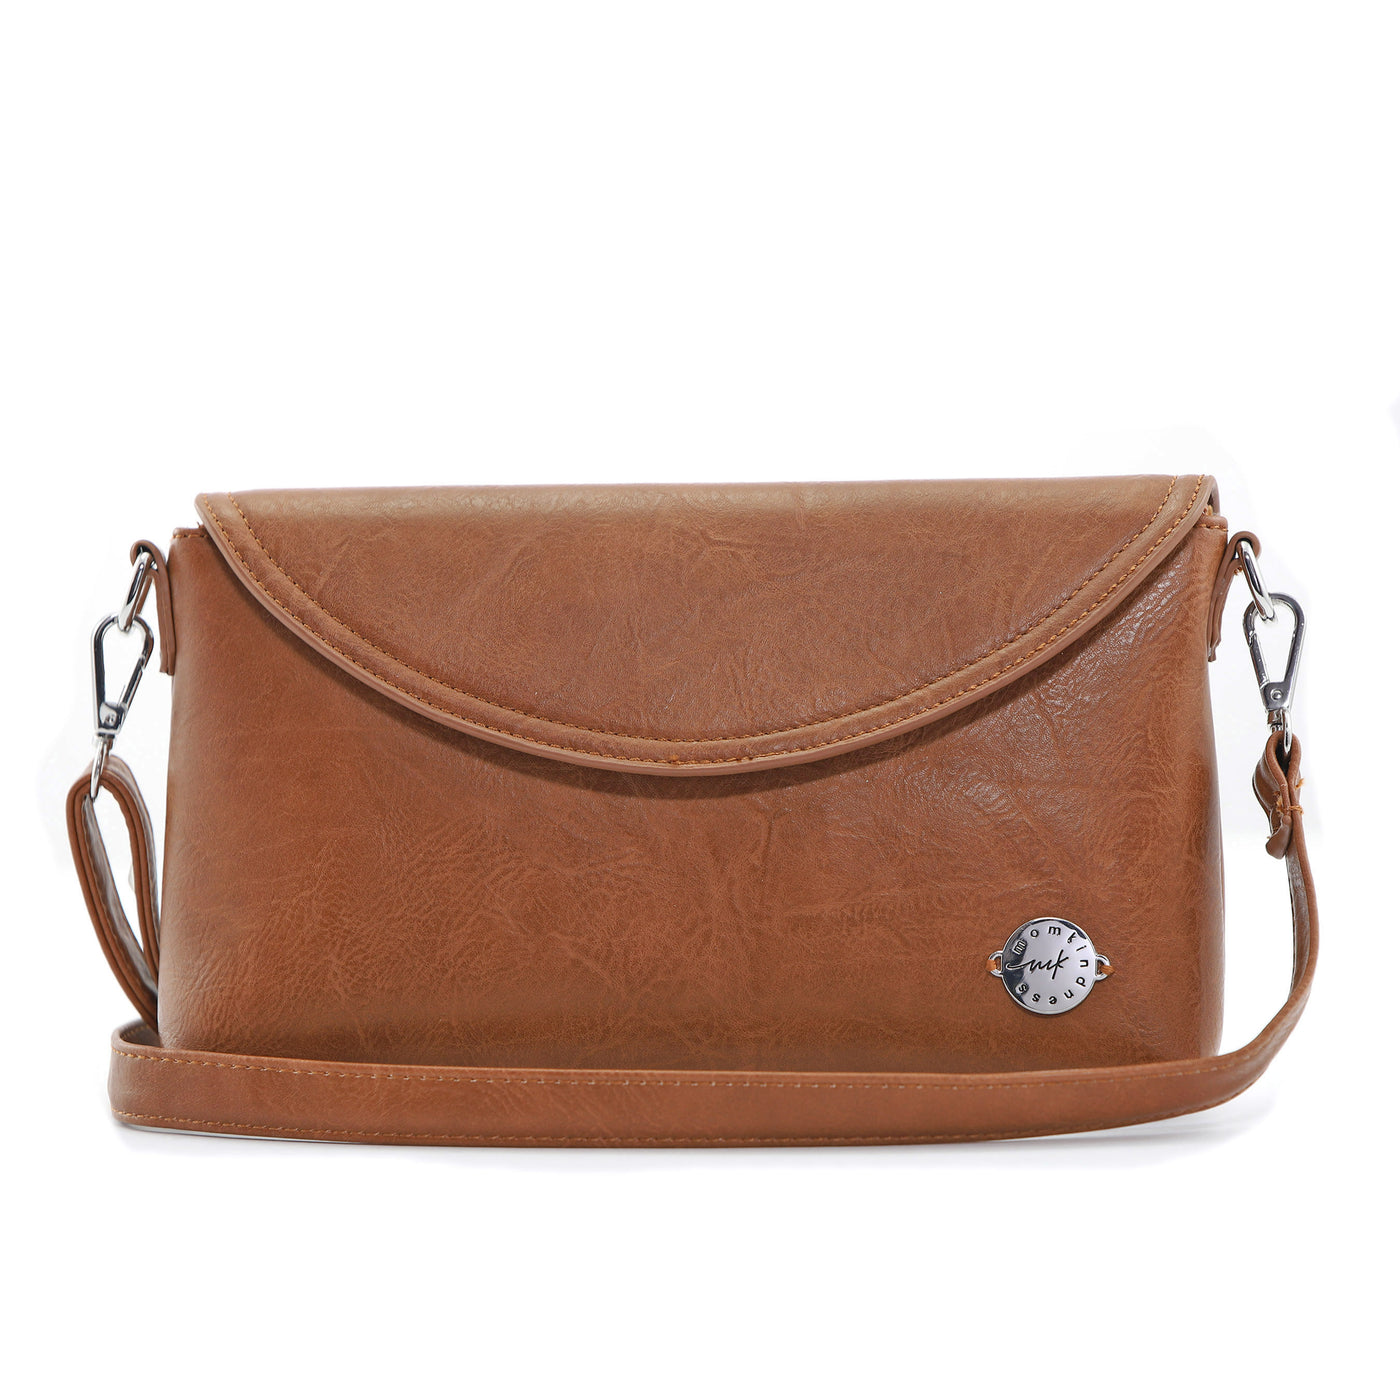 Caramel brown vegan leather clutch with removable crossbody strap on white background.